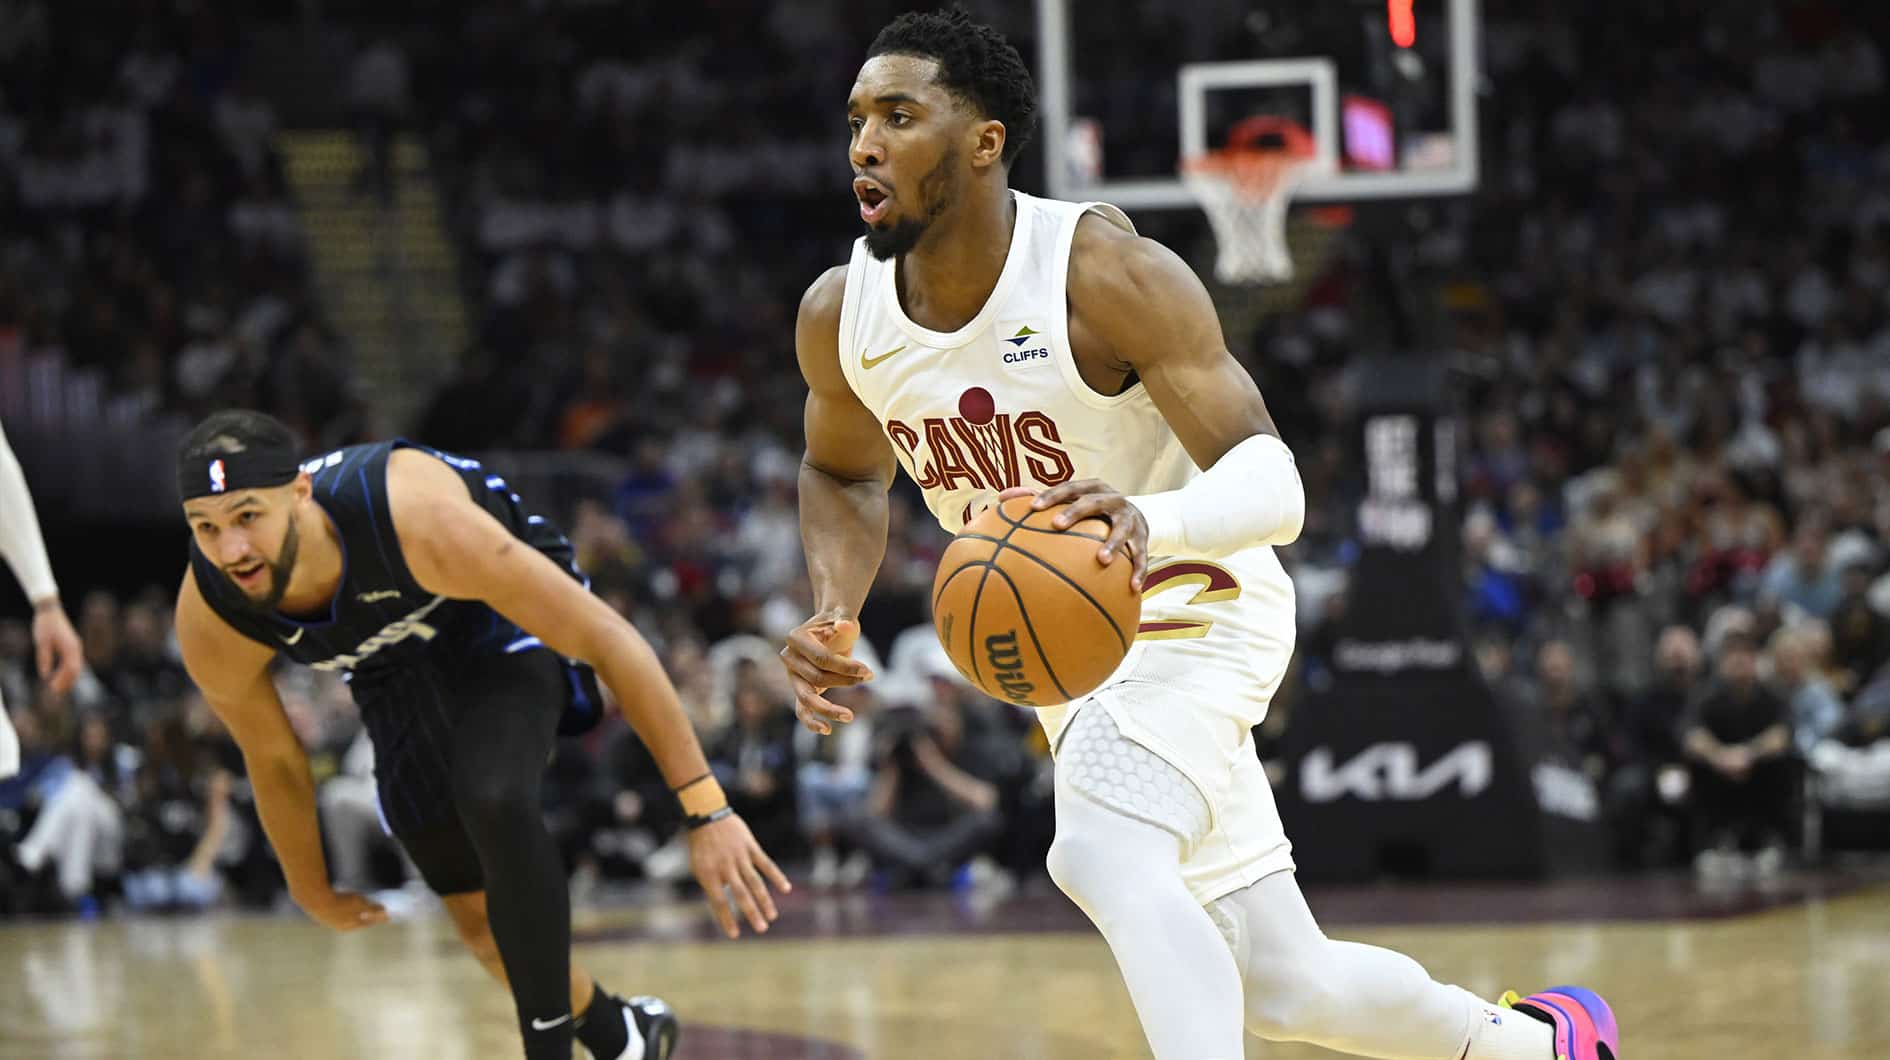 Cleveland Cavaliers guard Donovan Mitchell (45) dribbles the ball in the second quarter against the Orlando Magic